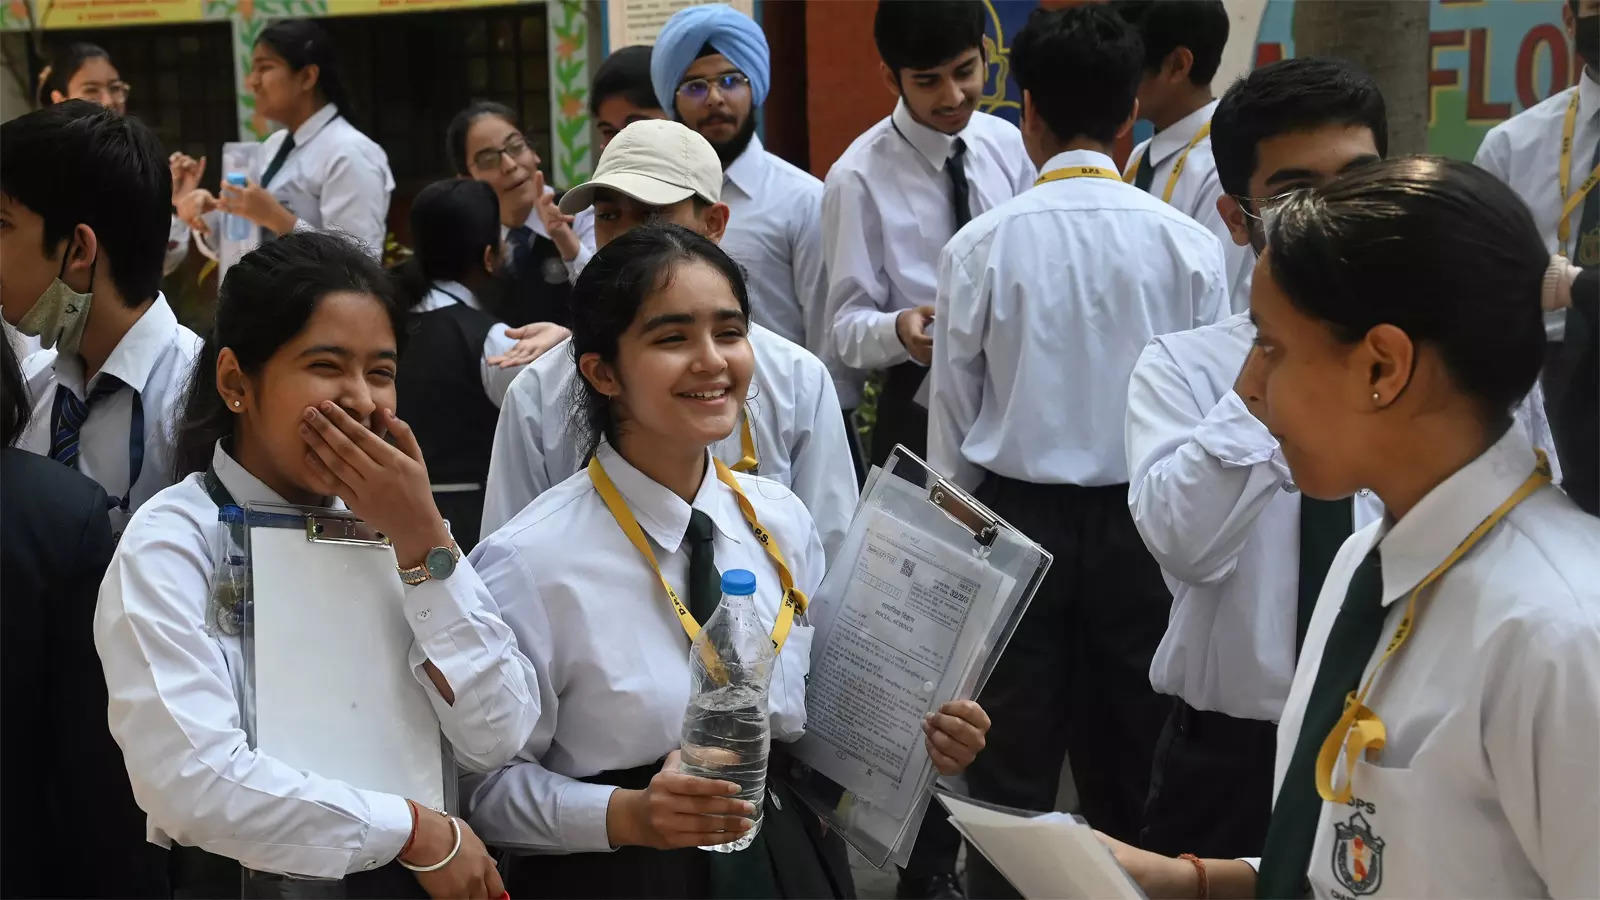 CISCE Board ISC Class 12 toppers list: Here are toppers' names, marks scored, rank and other details 